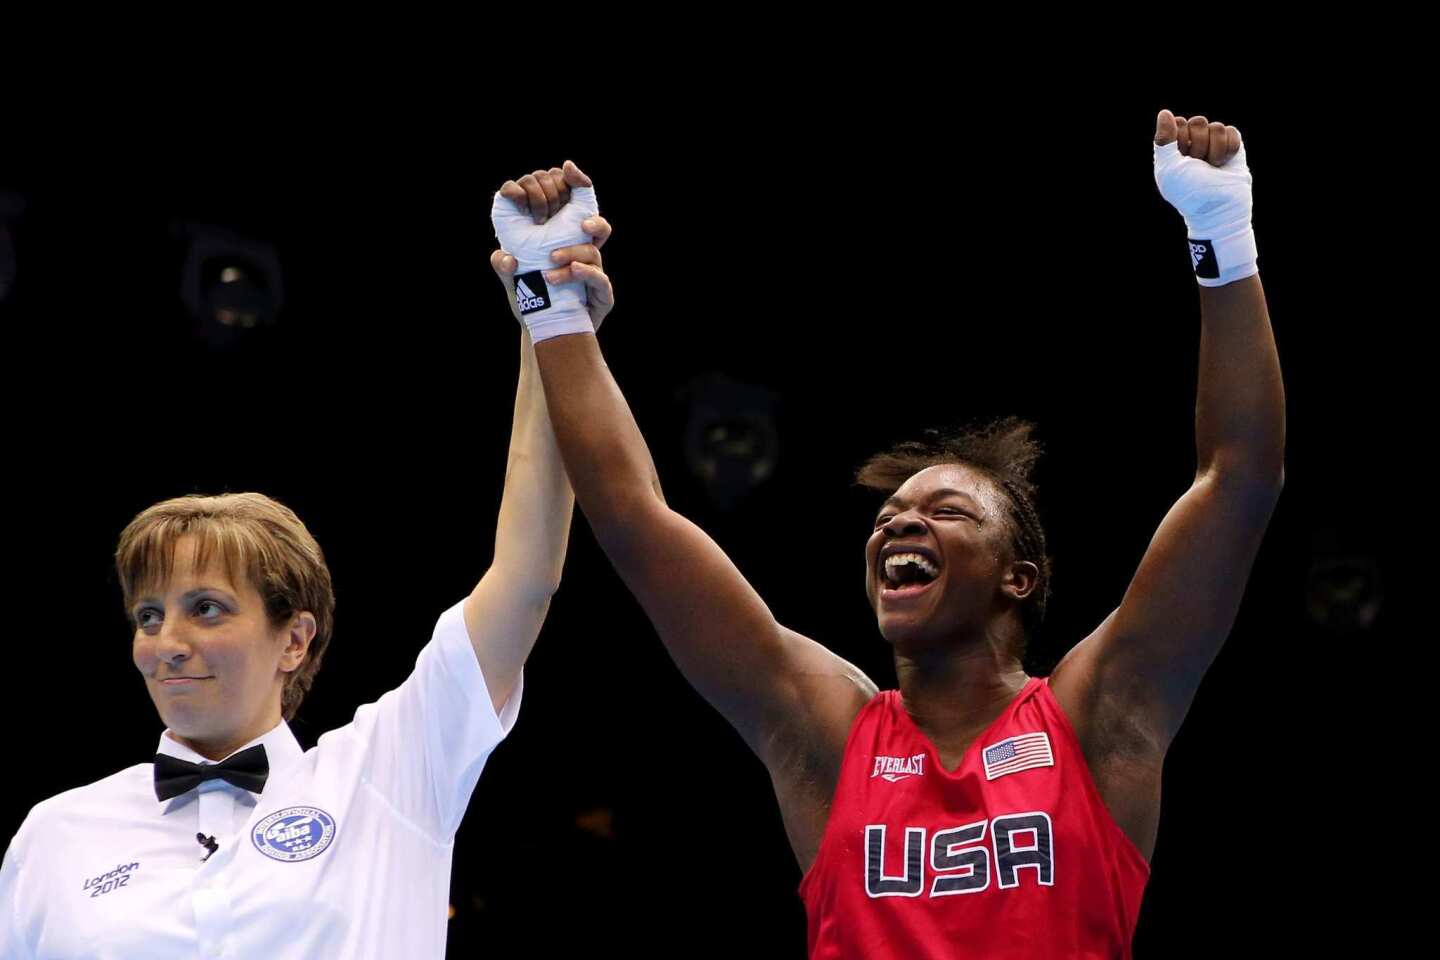 Referee Kheira Sidi Yakoub, left, announces Claressa Shields of the United States as the winner in the women's middleweight championship bout, giving her the historic first gold in the sport's Olympic debut.